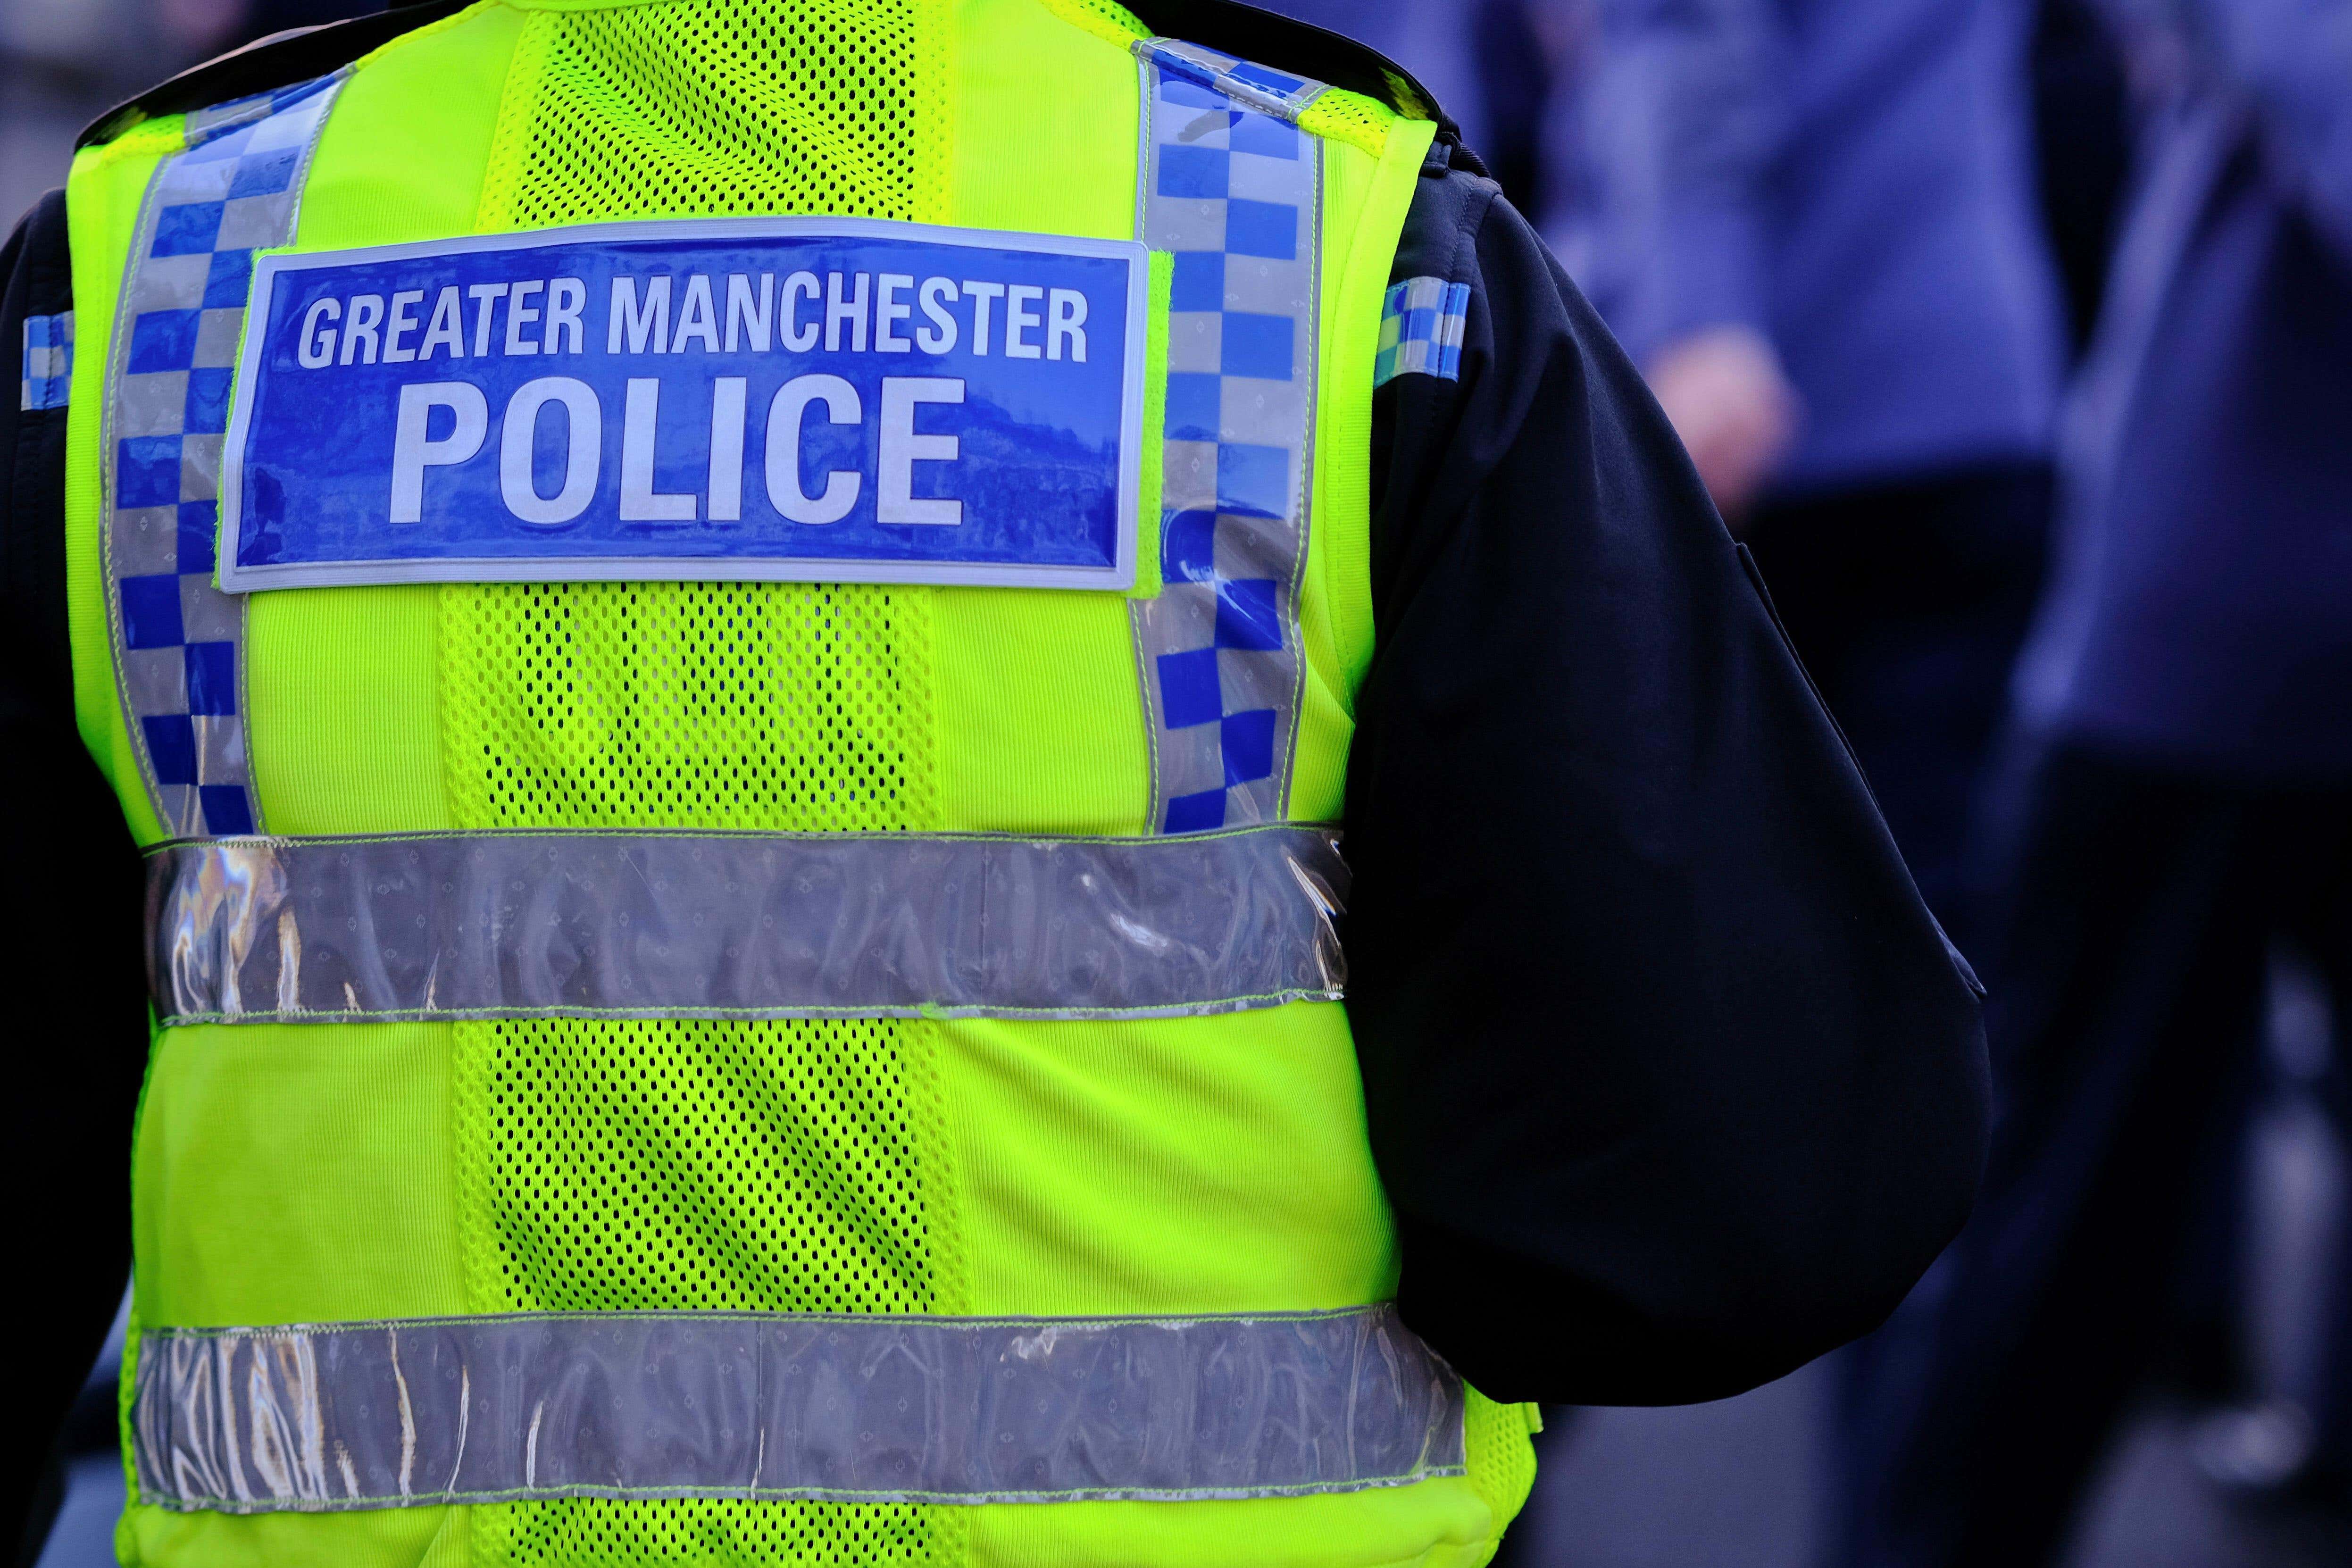 Greater Manchester Police failed to properly investigate Rochdale’s grooming gangs